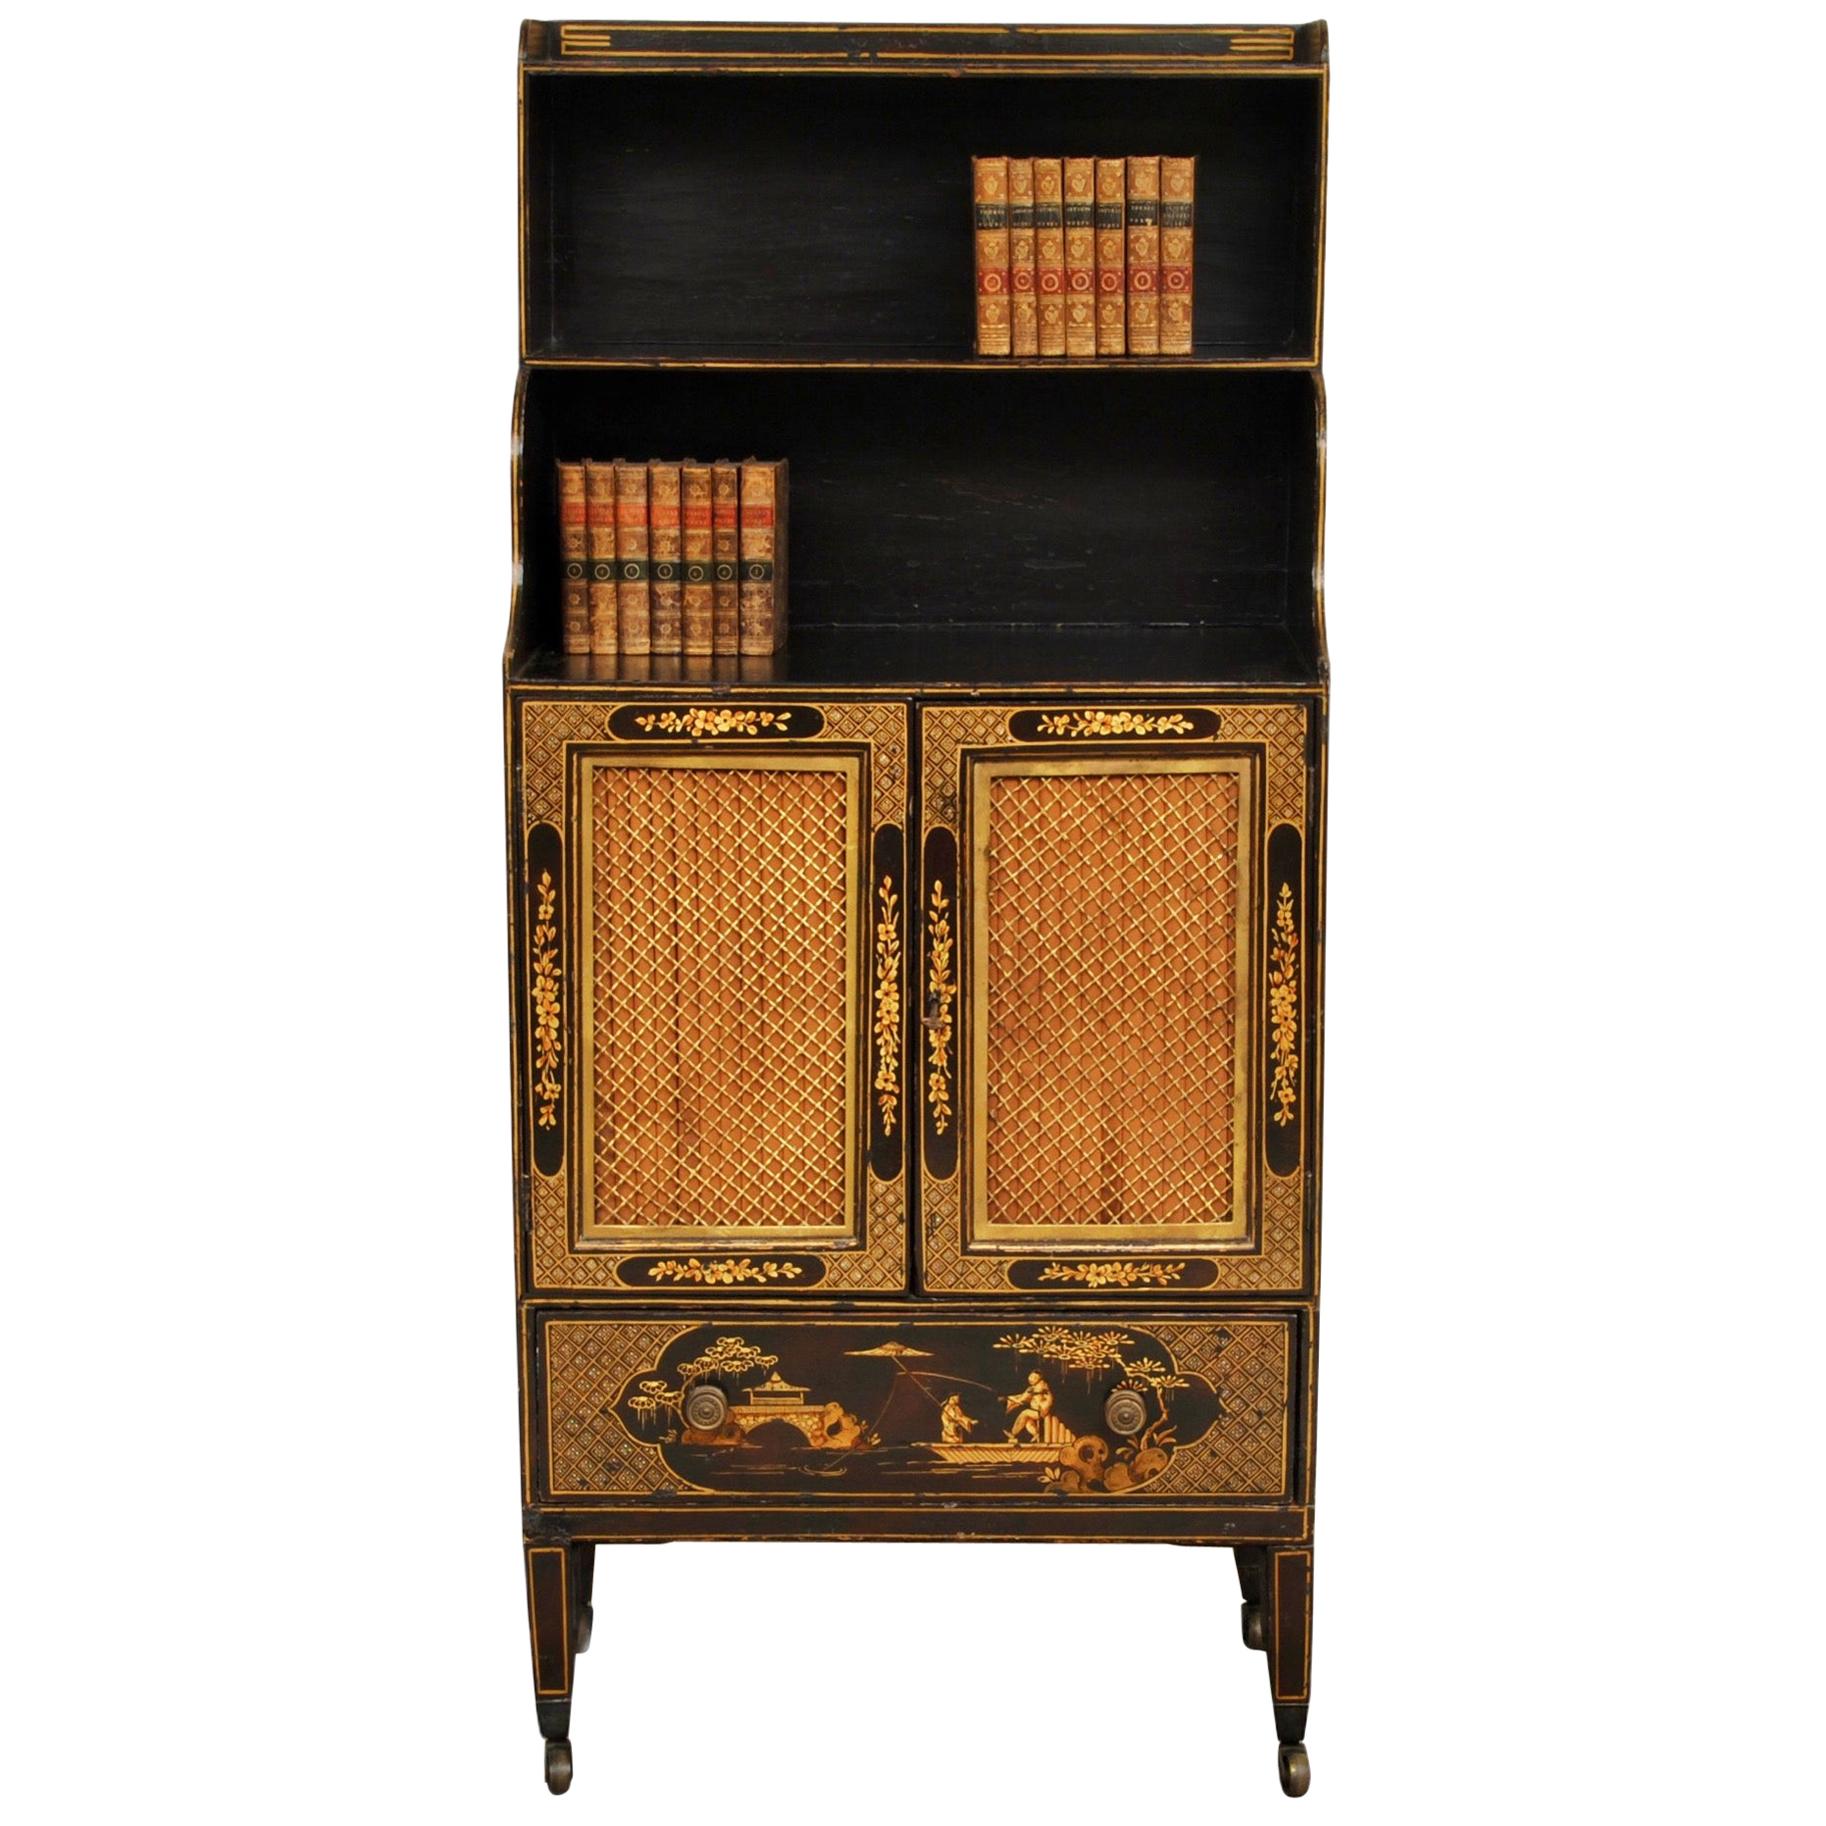 Regency Period Lacquered Bookcase with Open Shelves